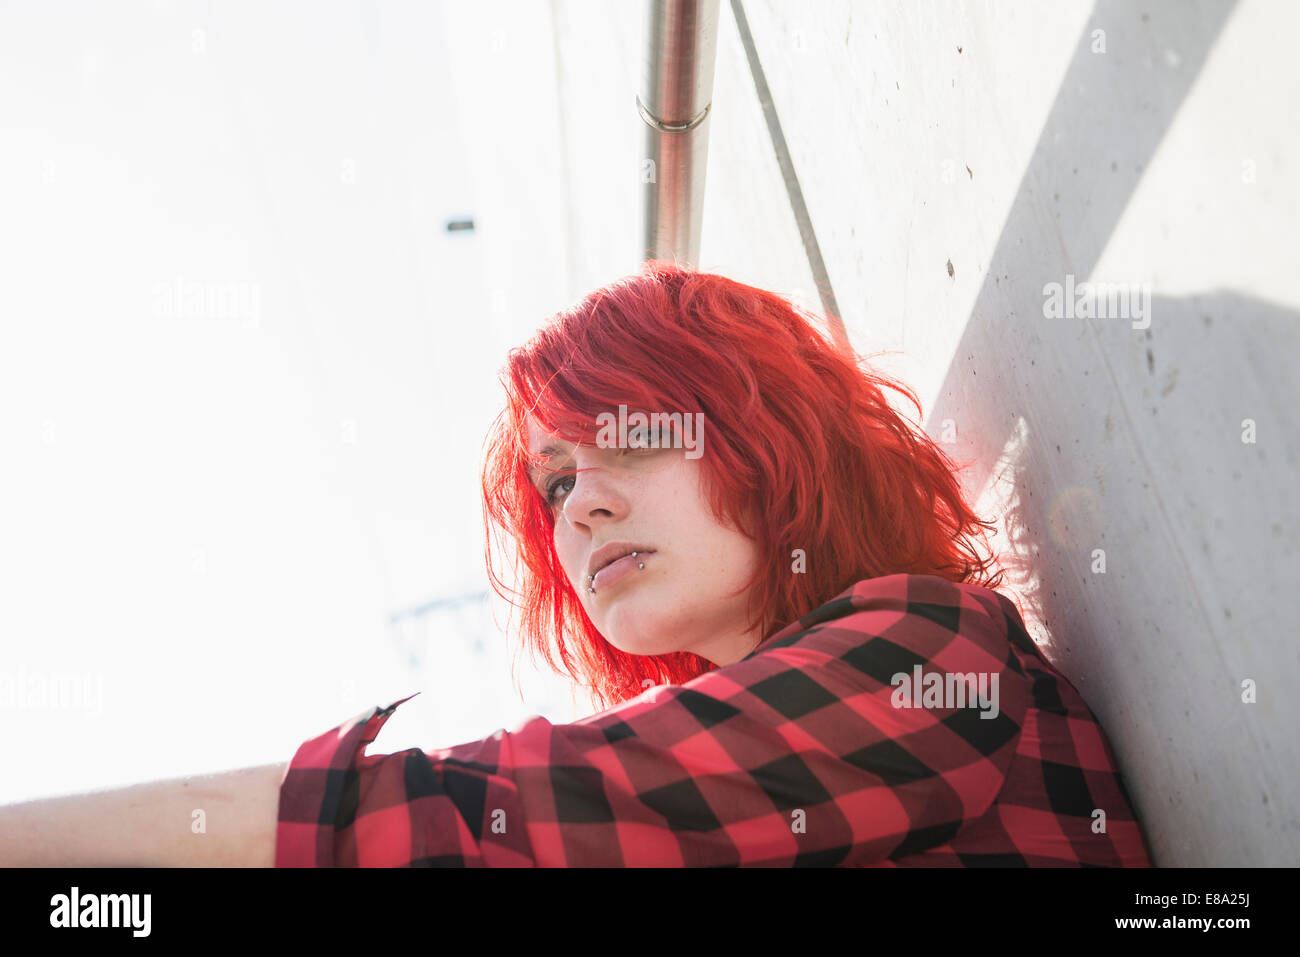 Portrait young defiant teenage dyed hair piercings Stock Photo